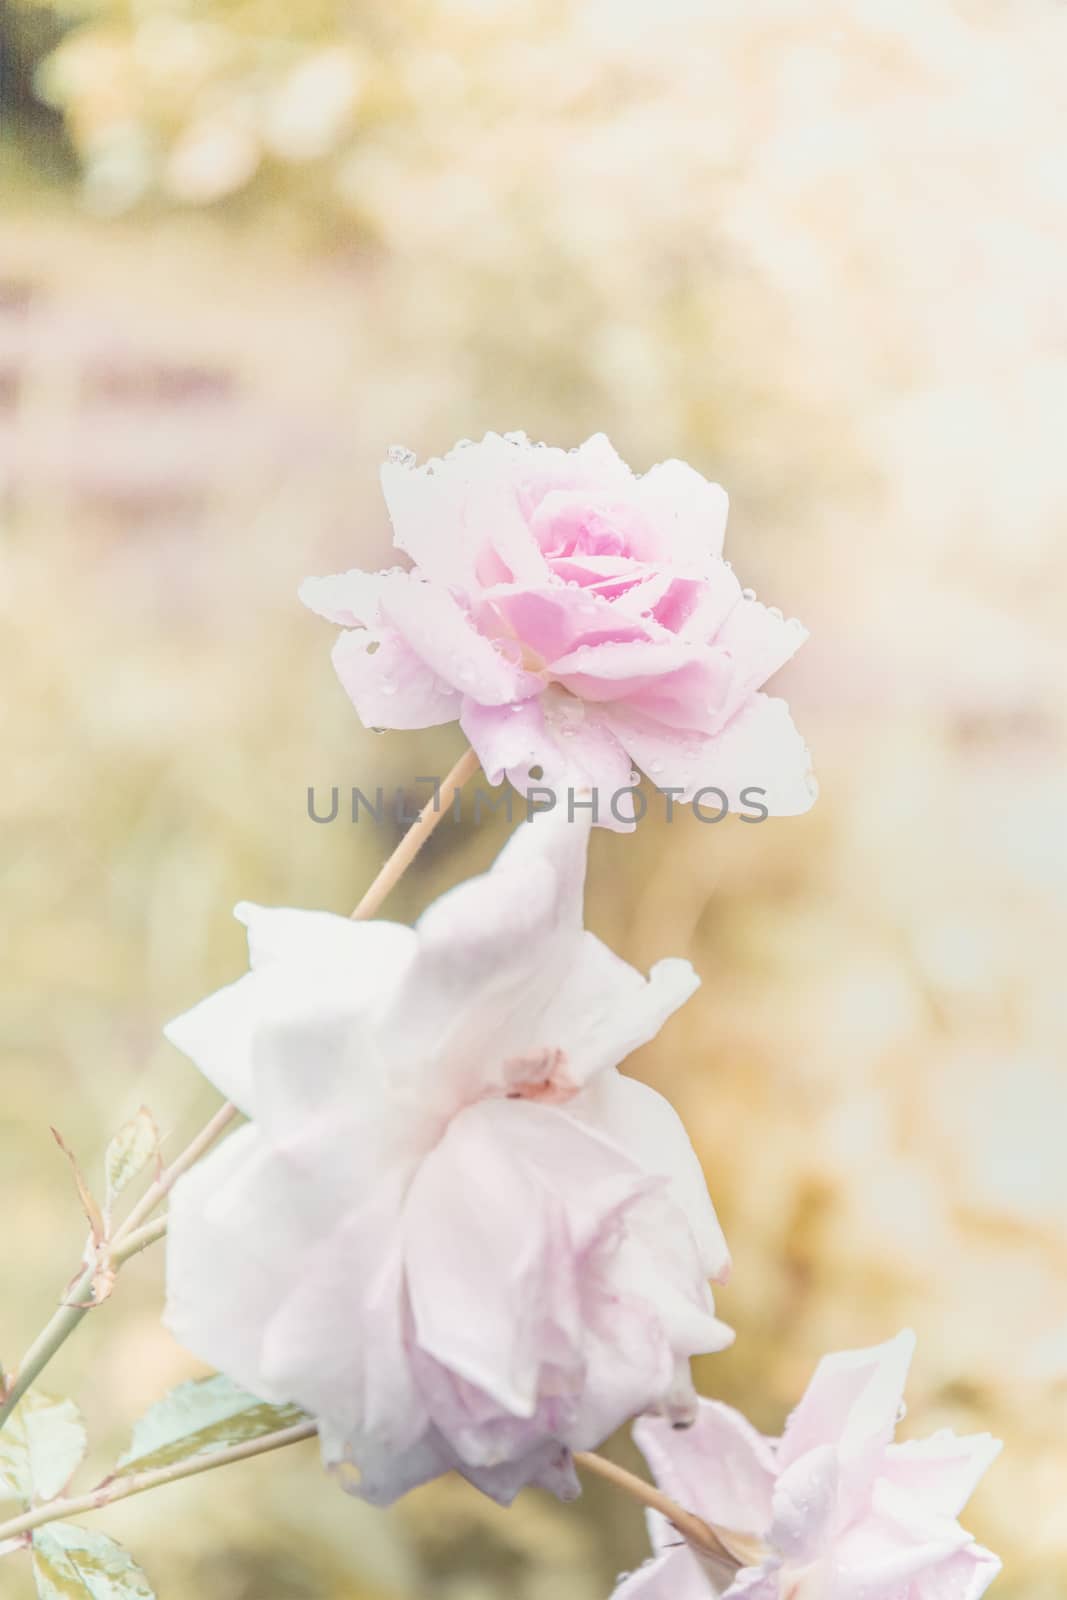 Water droplets on pink rose, soft and blur style for background  by rakoptonLPN